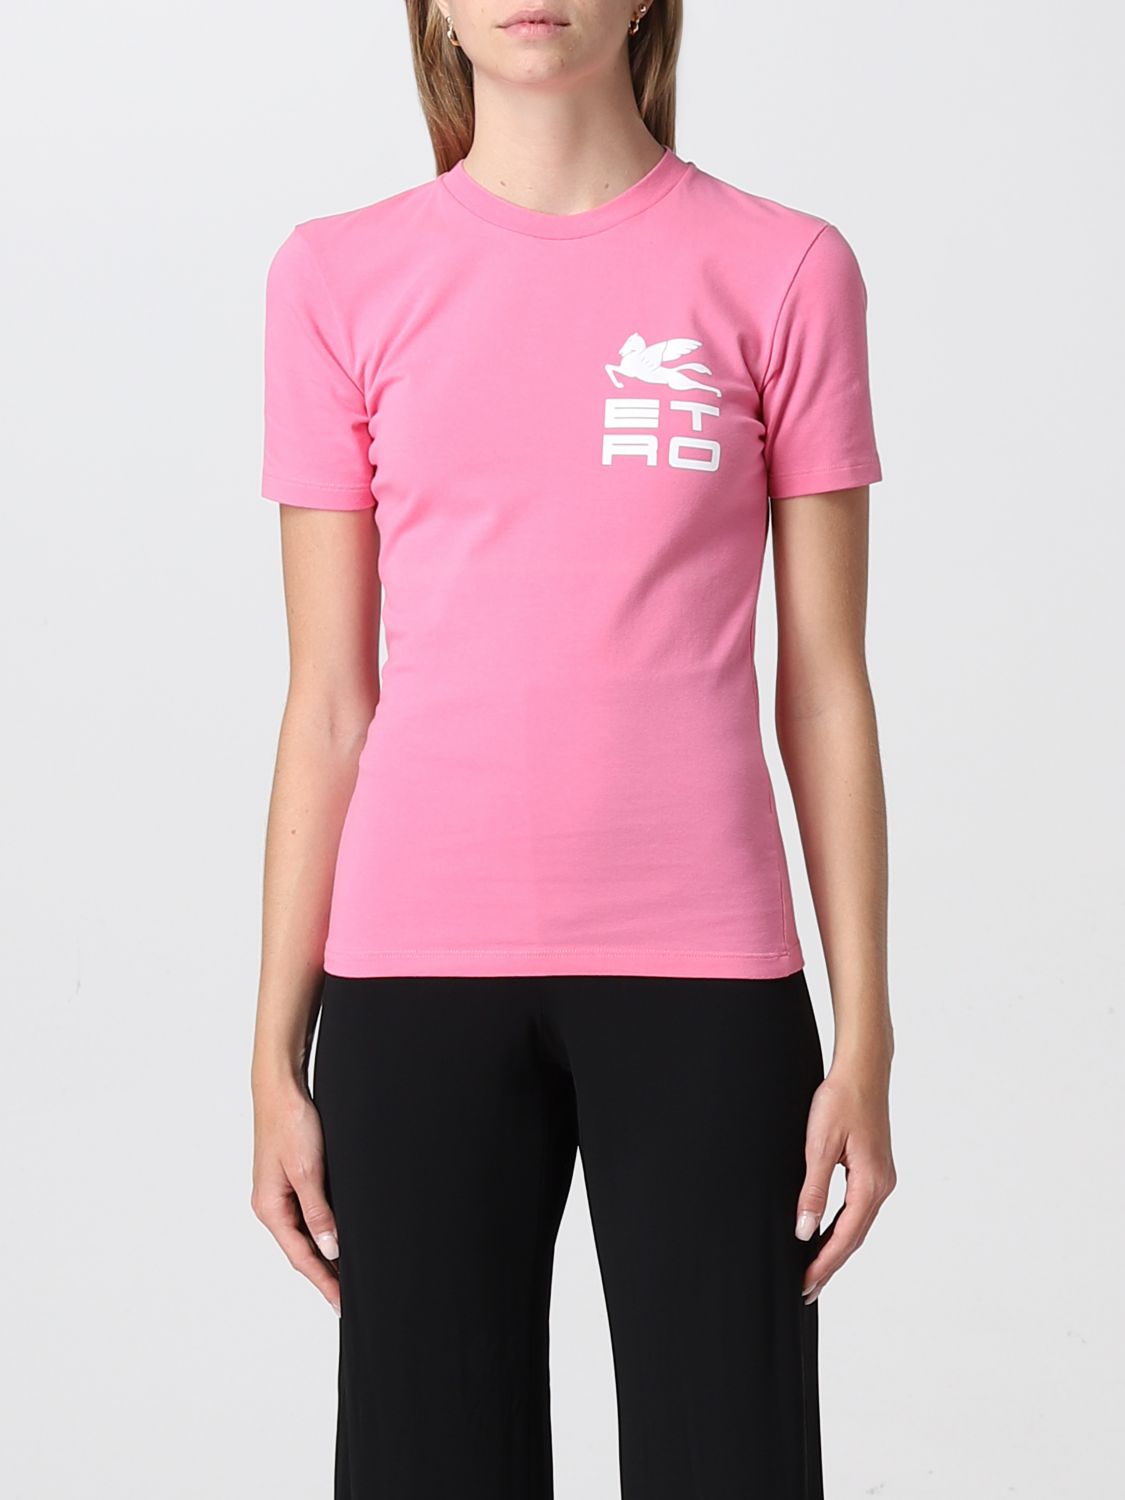 ETRO: T-shirt with Cube logo - Pink | Etro t-shirt 195099952 online on ...